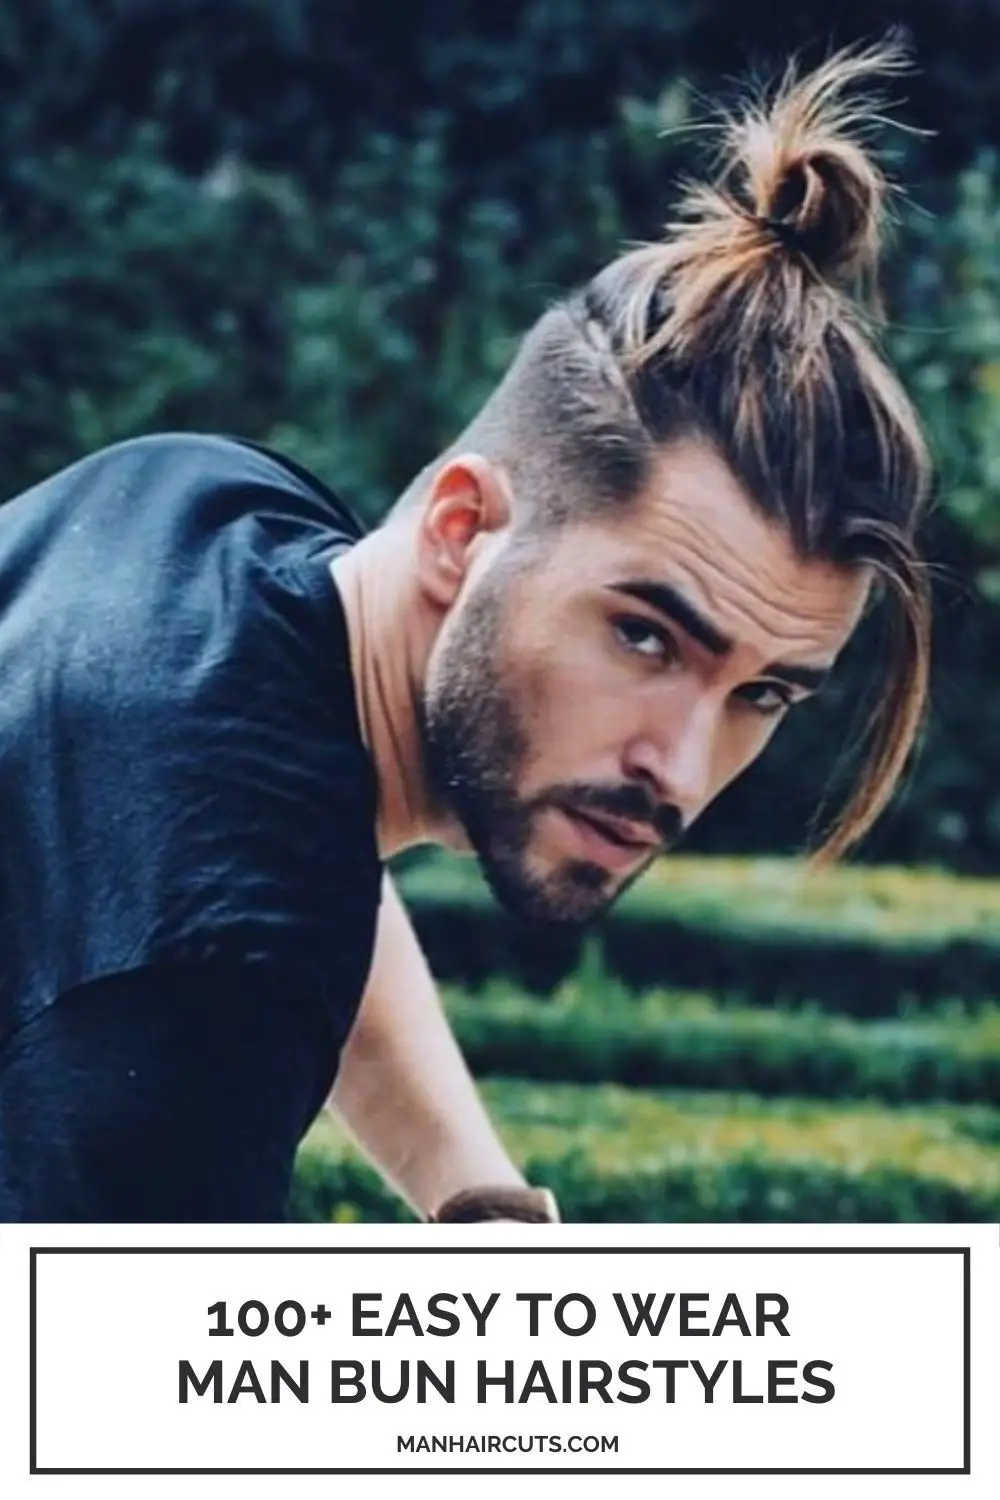 33-best-haircuts-for-men-with-square-faces-trending-this-year Man Bun